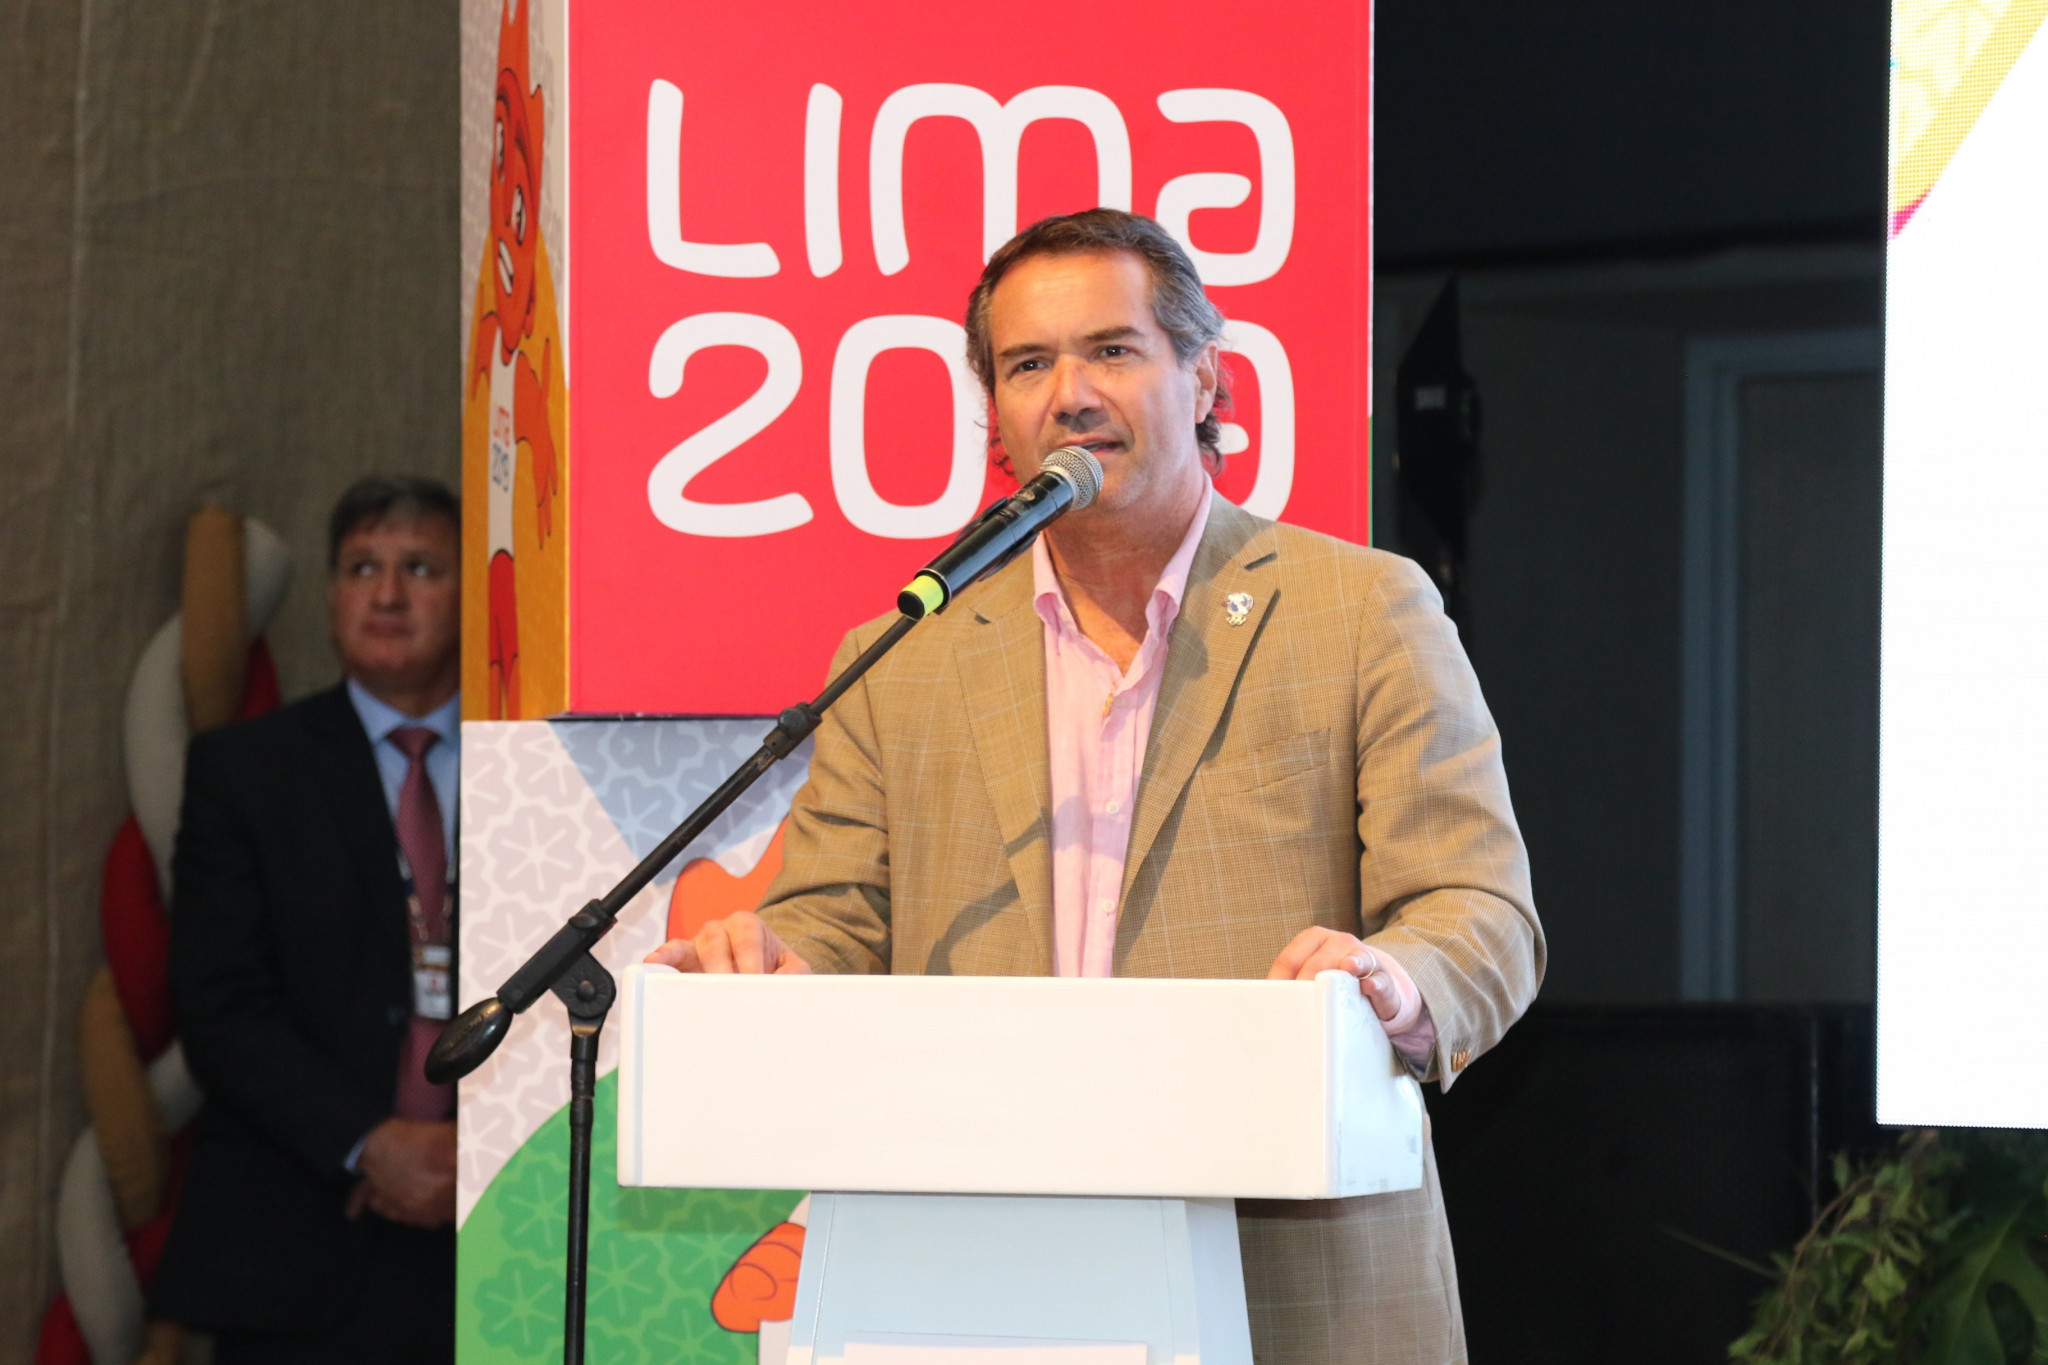 Panam Sports President Neven Ilic expressed further concerns over transport in Lima ©Panam Sports